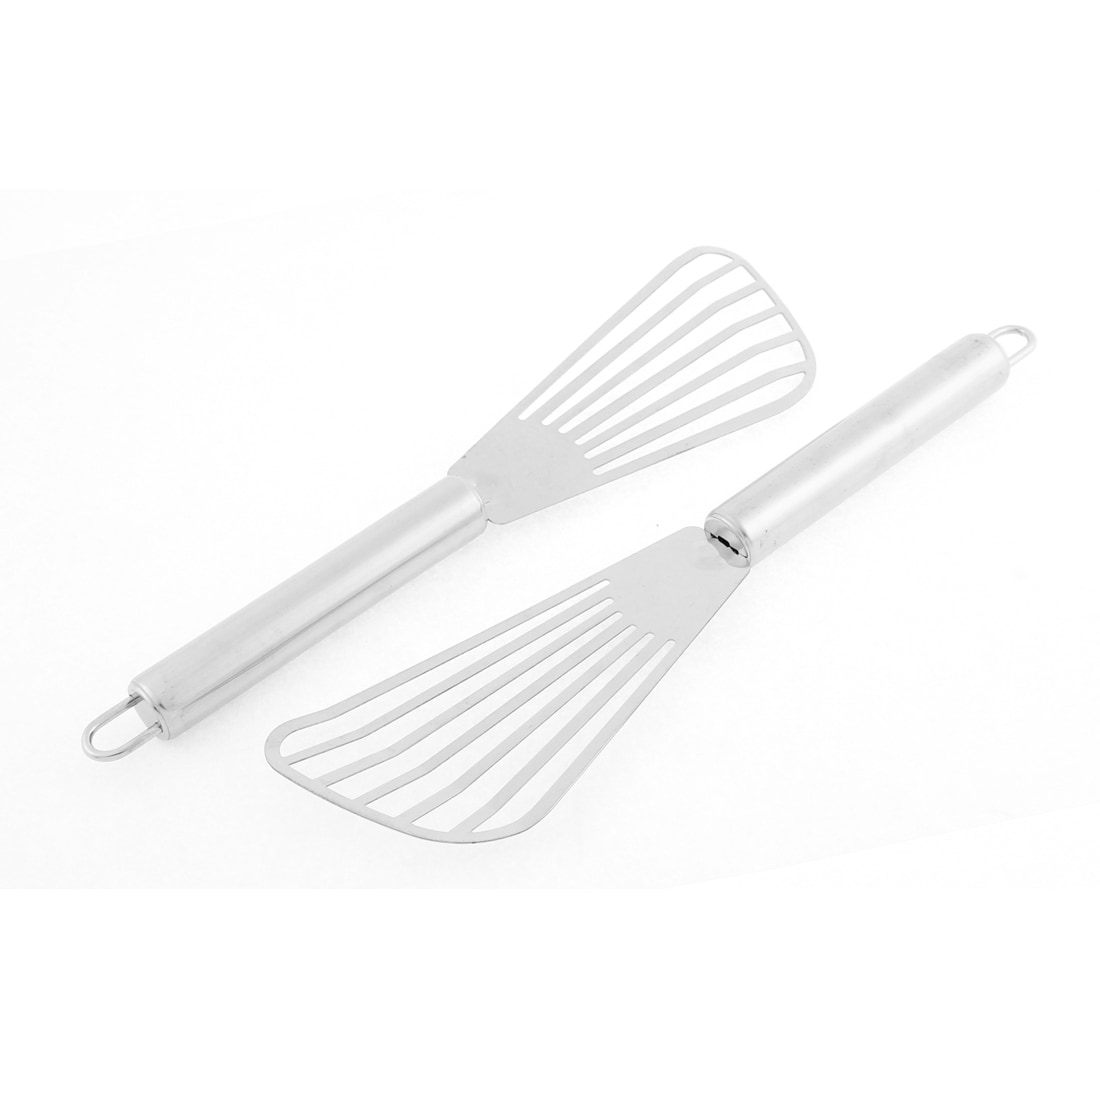 https://ak1.ostkcdn.com/images/products/is/images/direct/e3a847cfbe912ebe231779ad8a9d0873c4aa78c0/Stainless-Steel-Cooking-Spatula-Slotted-Pancake-Turner-2PCS.jpg